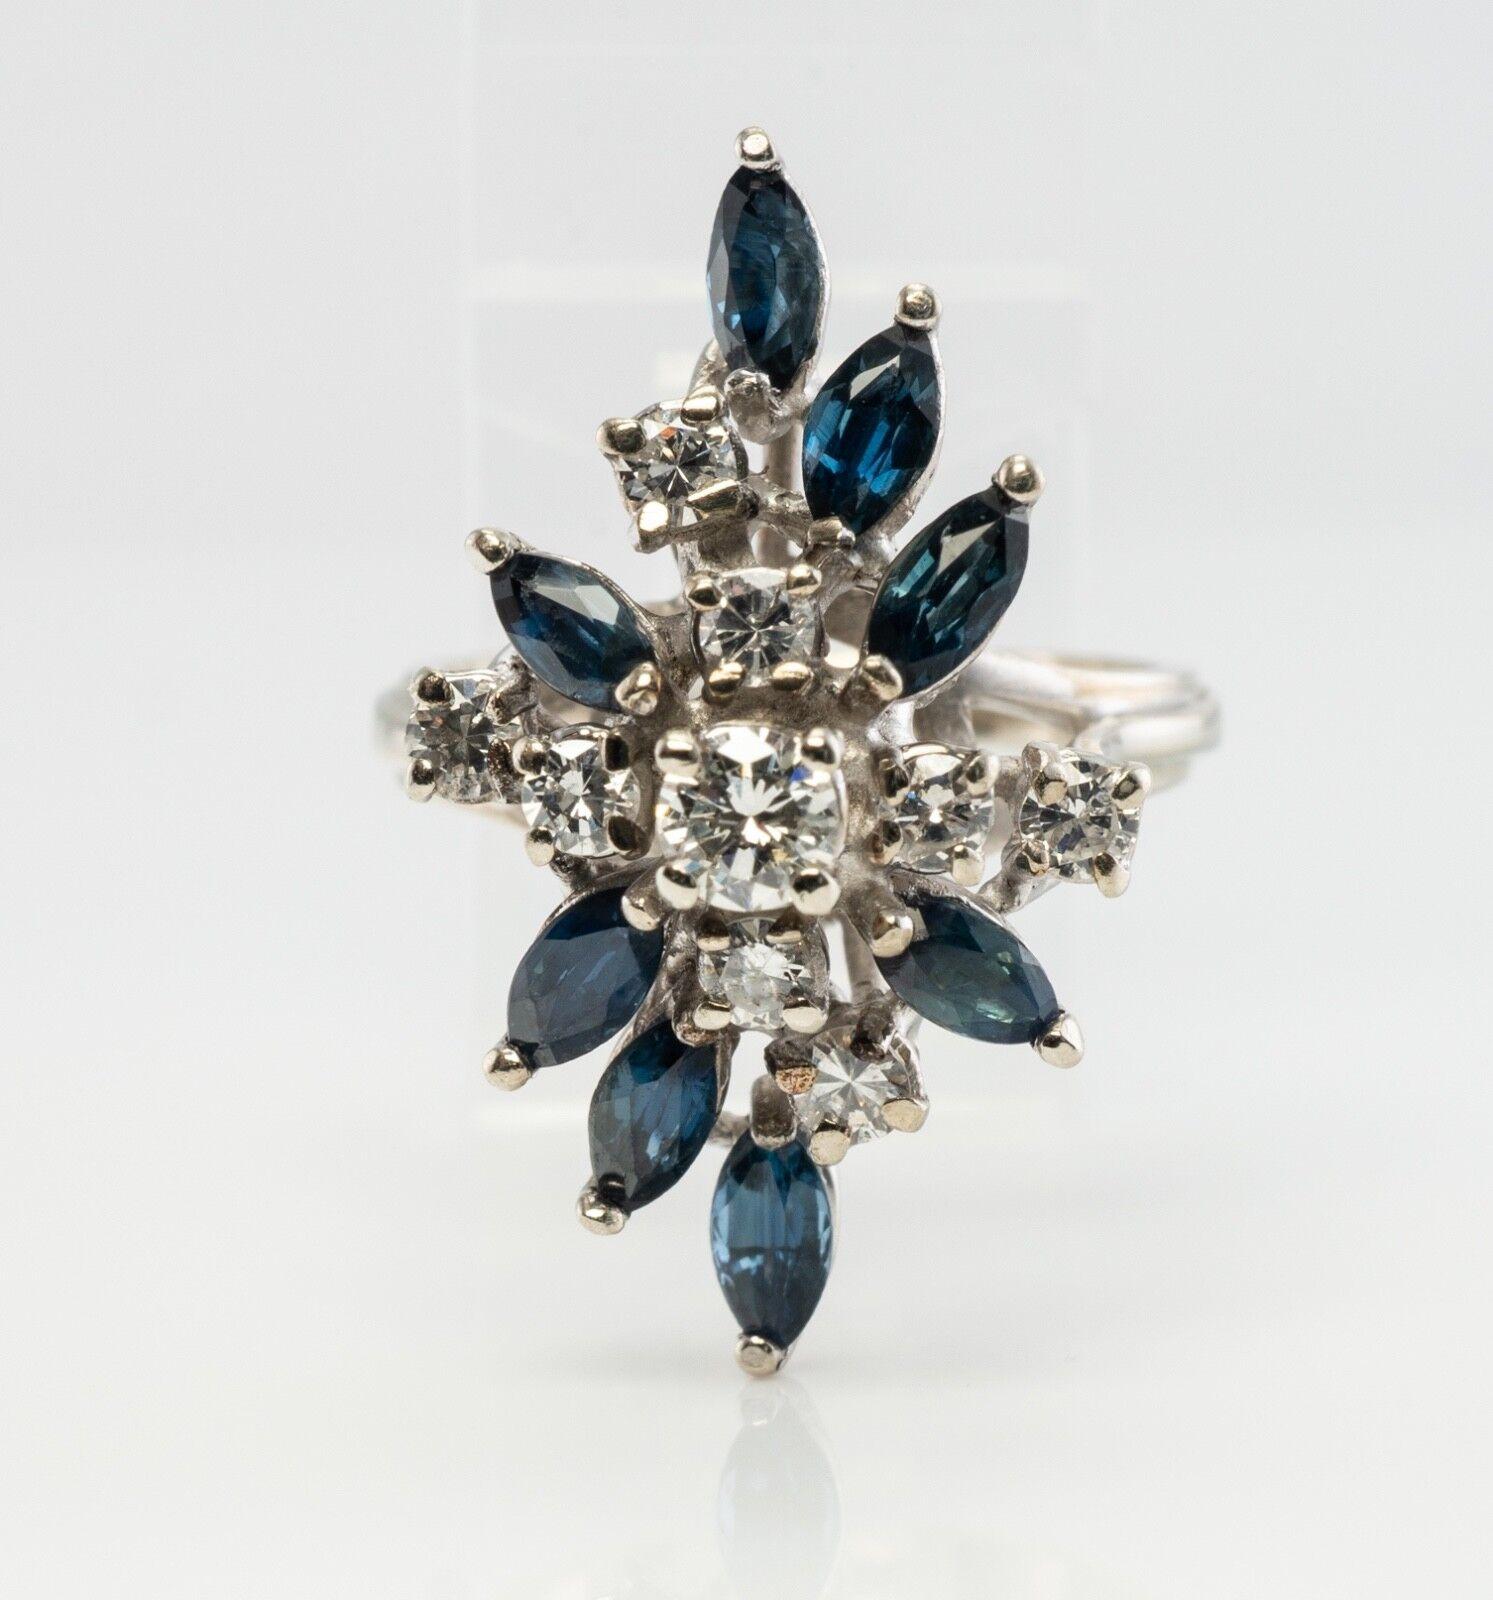 Diamond Sapphire Ring Flower 14K White Gold Vintage

This beautiful vintage ring is finely crafted in solid 14K White gold and set with genuine Earth mined Sapphires and diamonds. Eight marquise cut Sapphires measure 4mm x 2mm each for the total